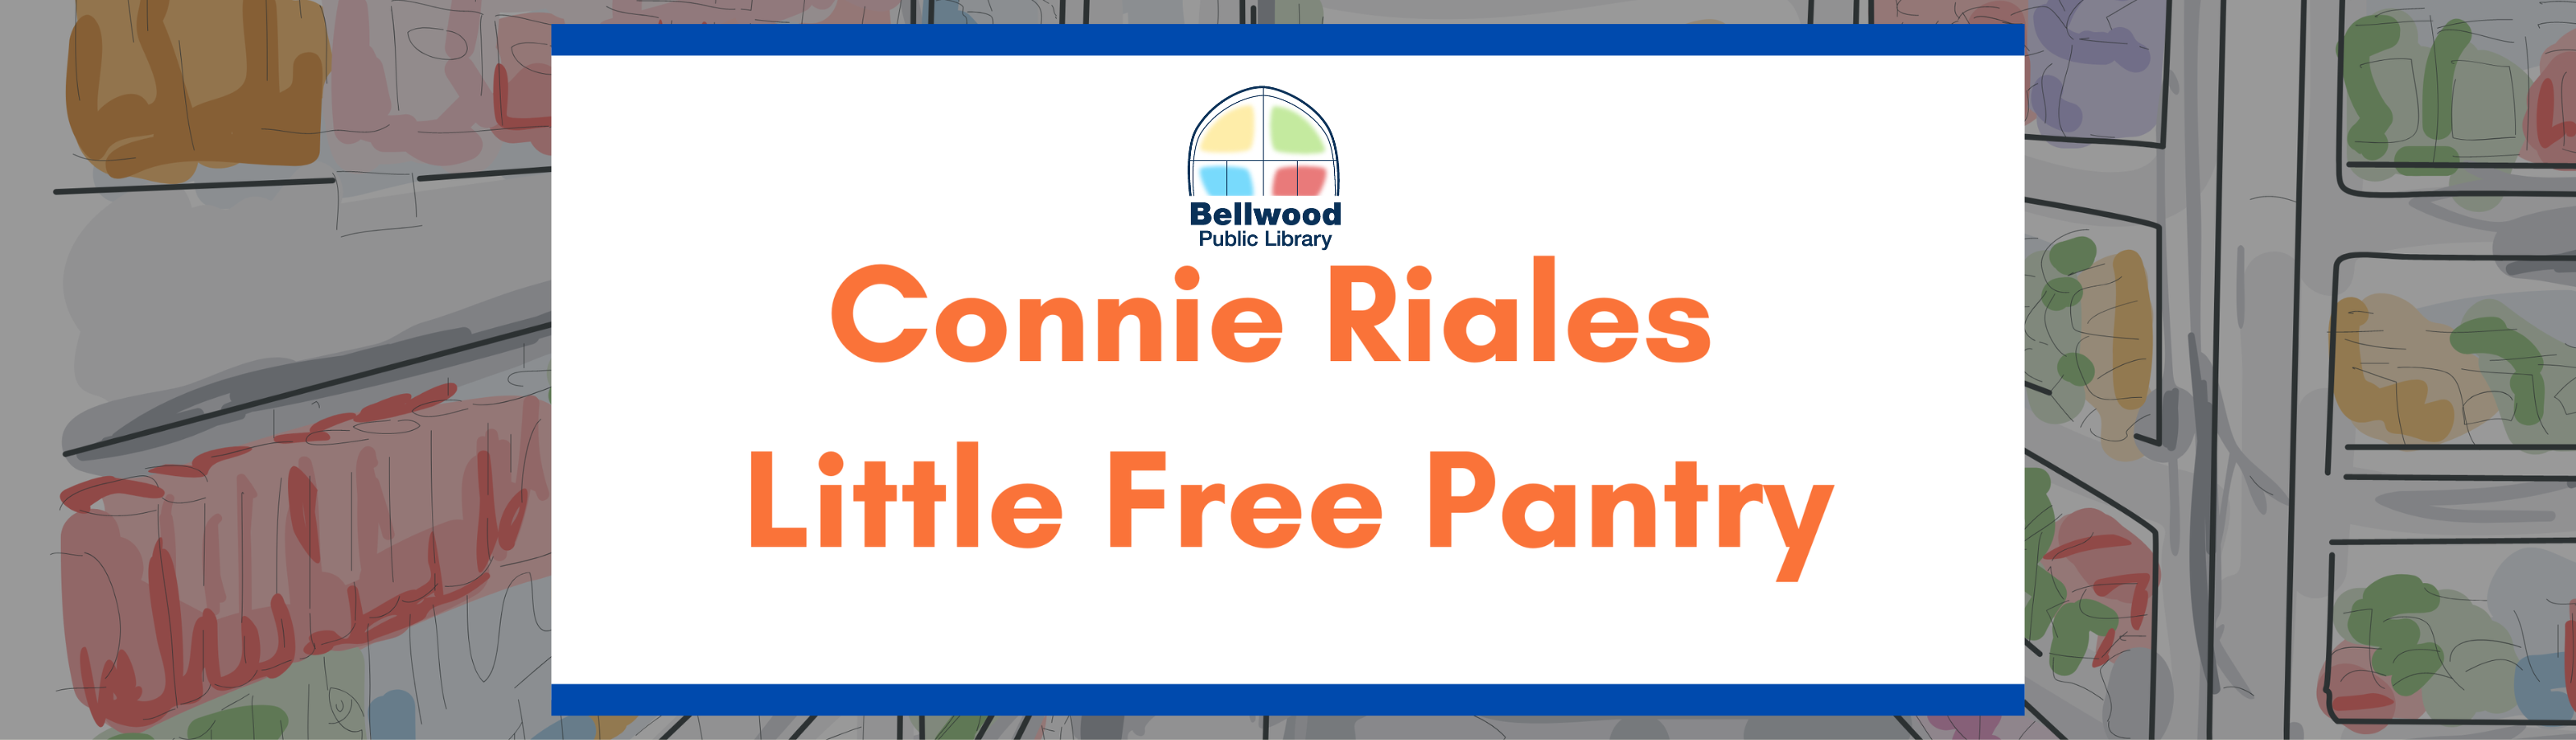 Orange text on a white background saying "Connie Riales Little Free Pantry."